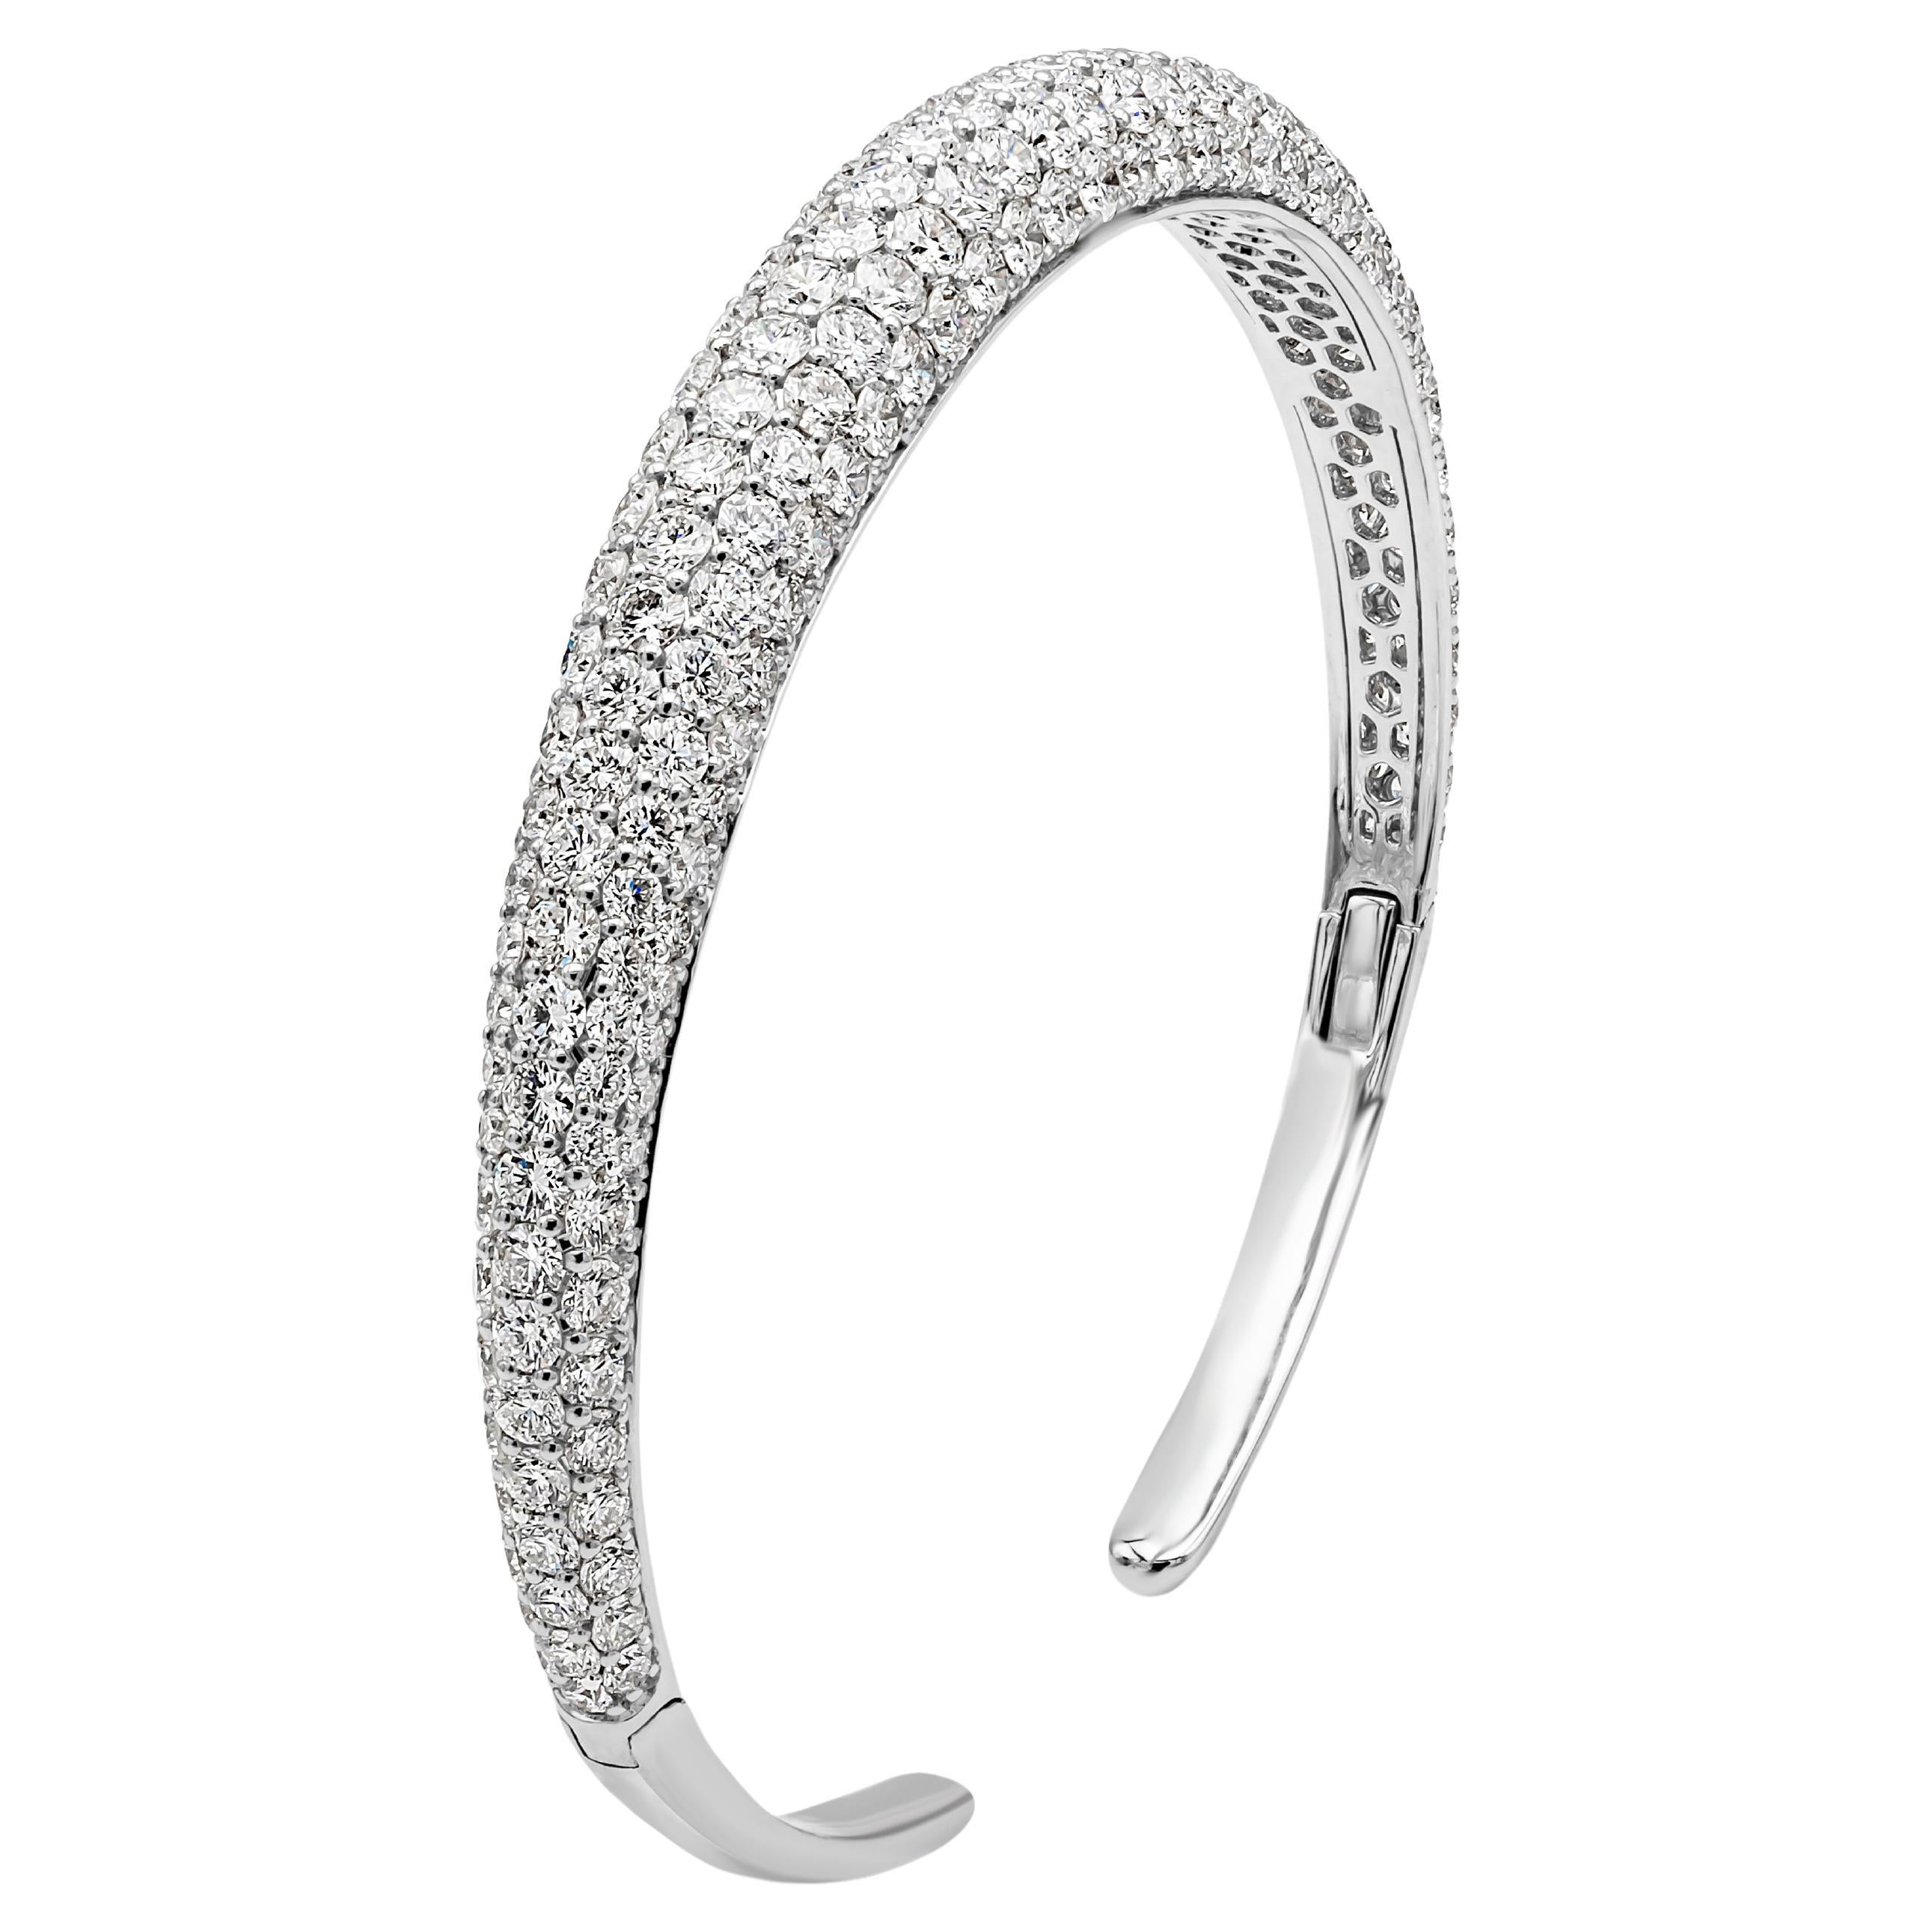 This beautiful and stunning bangle bracelet showcases 209 brilliant round cut diamond weighing 8.05 carats total, F-G color, VS-SI in clarity and micro-pave dome set in a shared prong setting. Finely made in 18K White Gold and 6.75 inches in